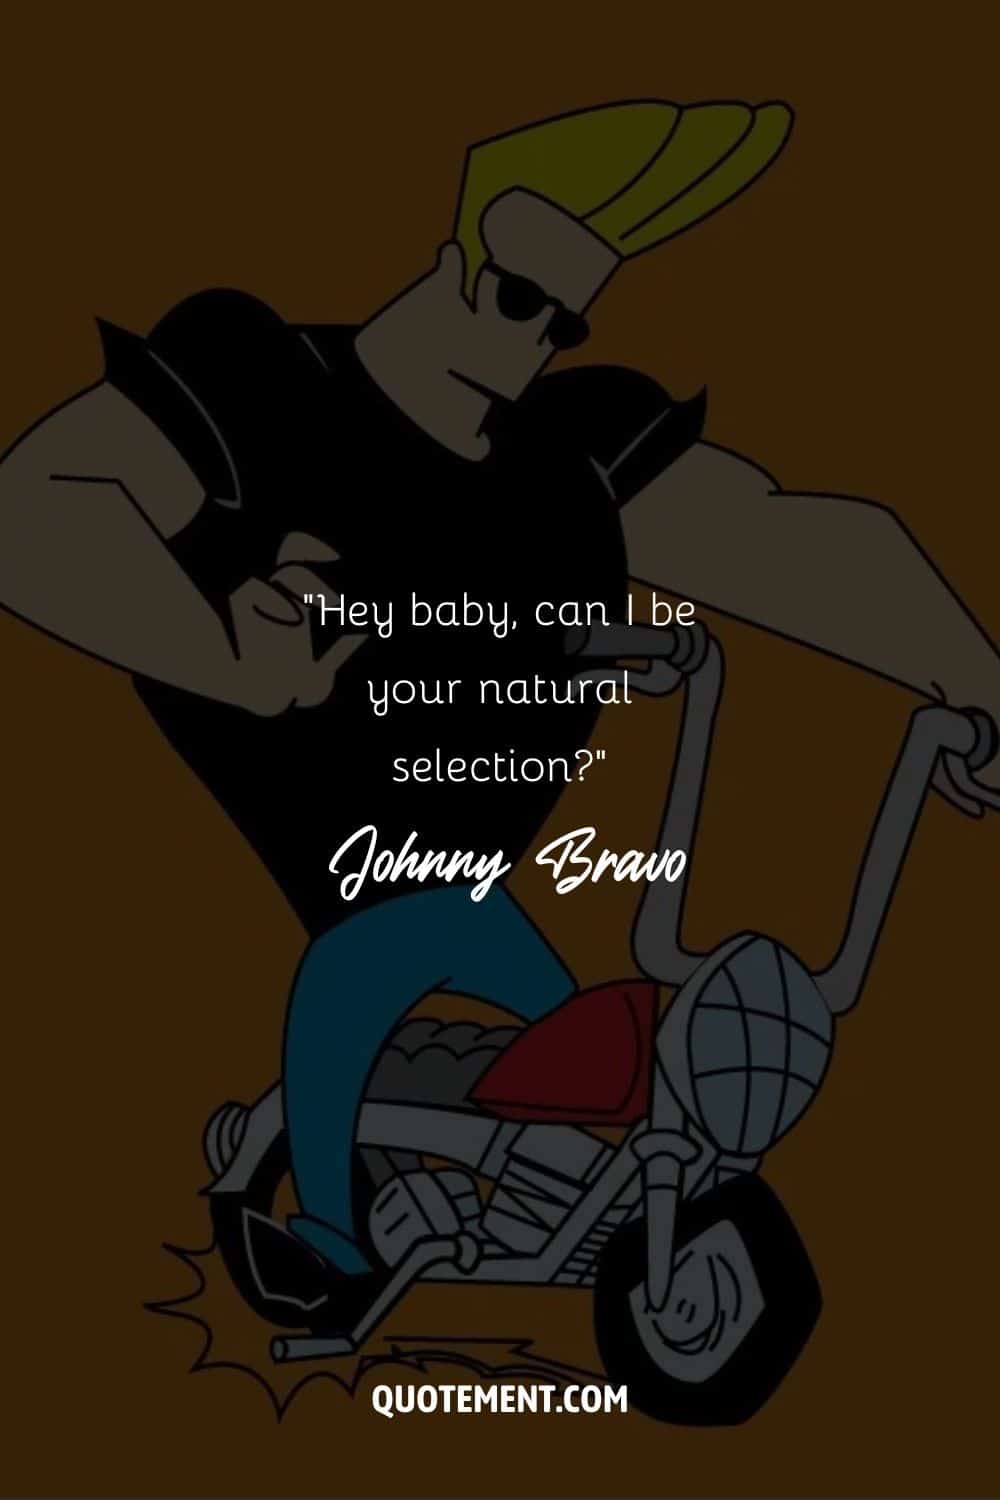 Johnny Bravo driving a small motorcycle
